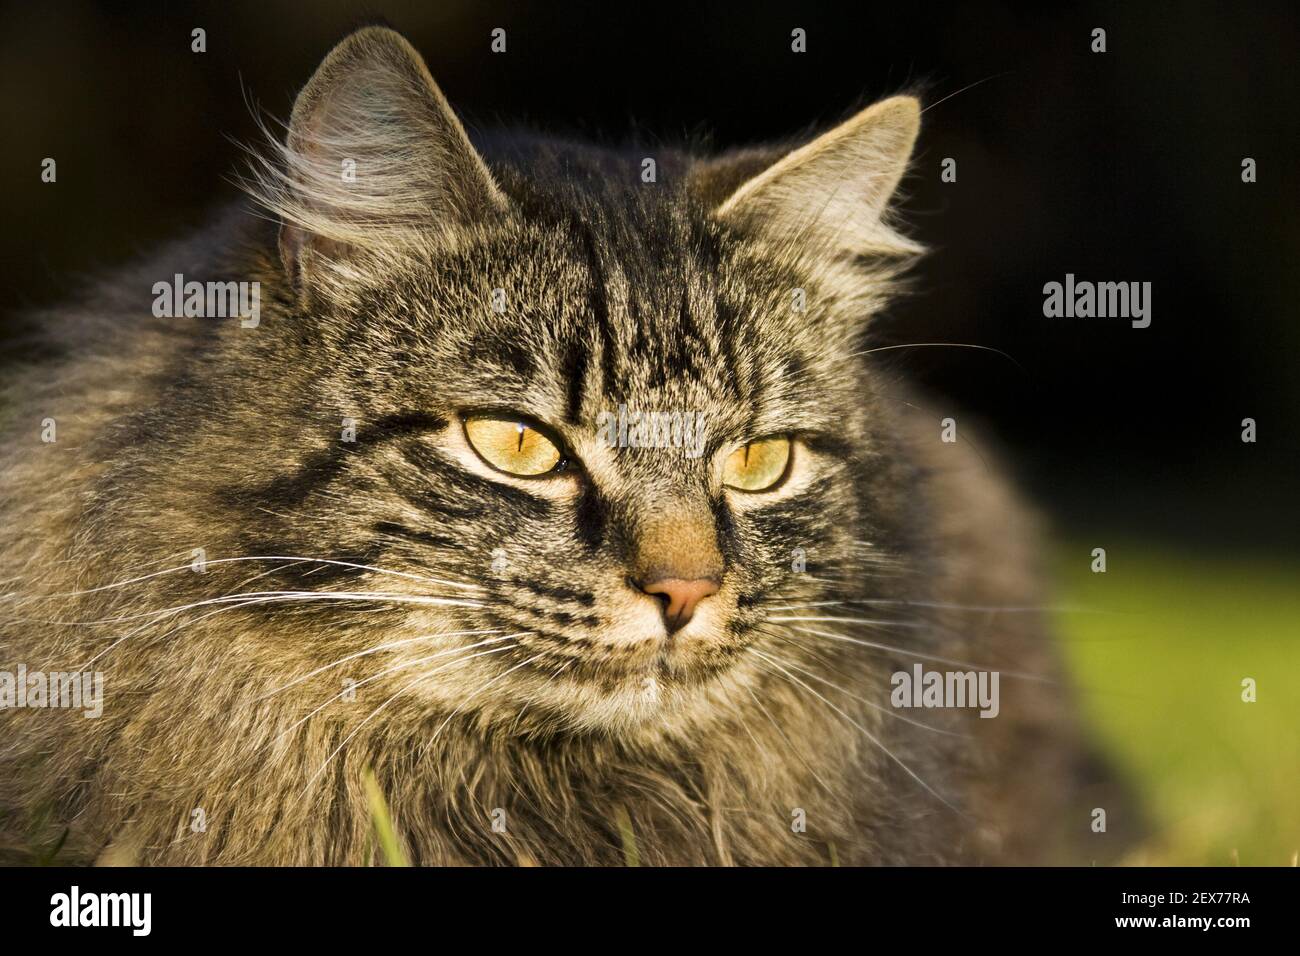 German longhaired cat, German longhaired cat, German long-haired cat Stock Photo